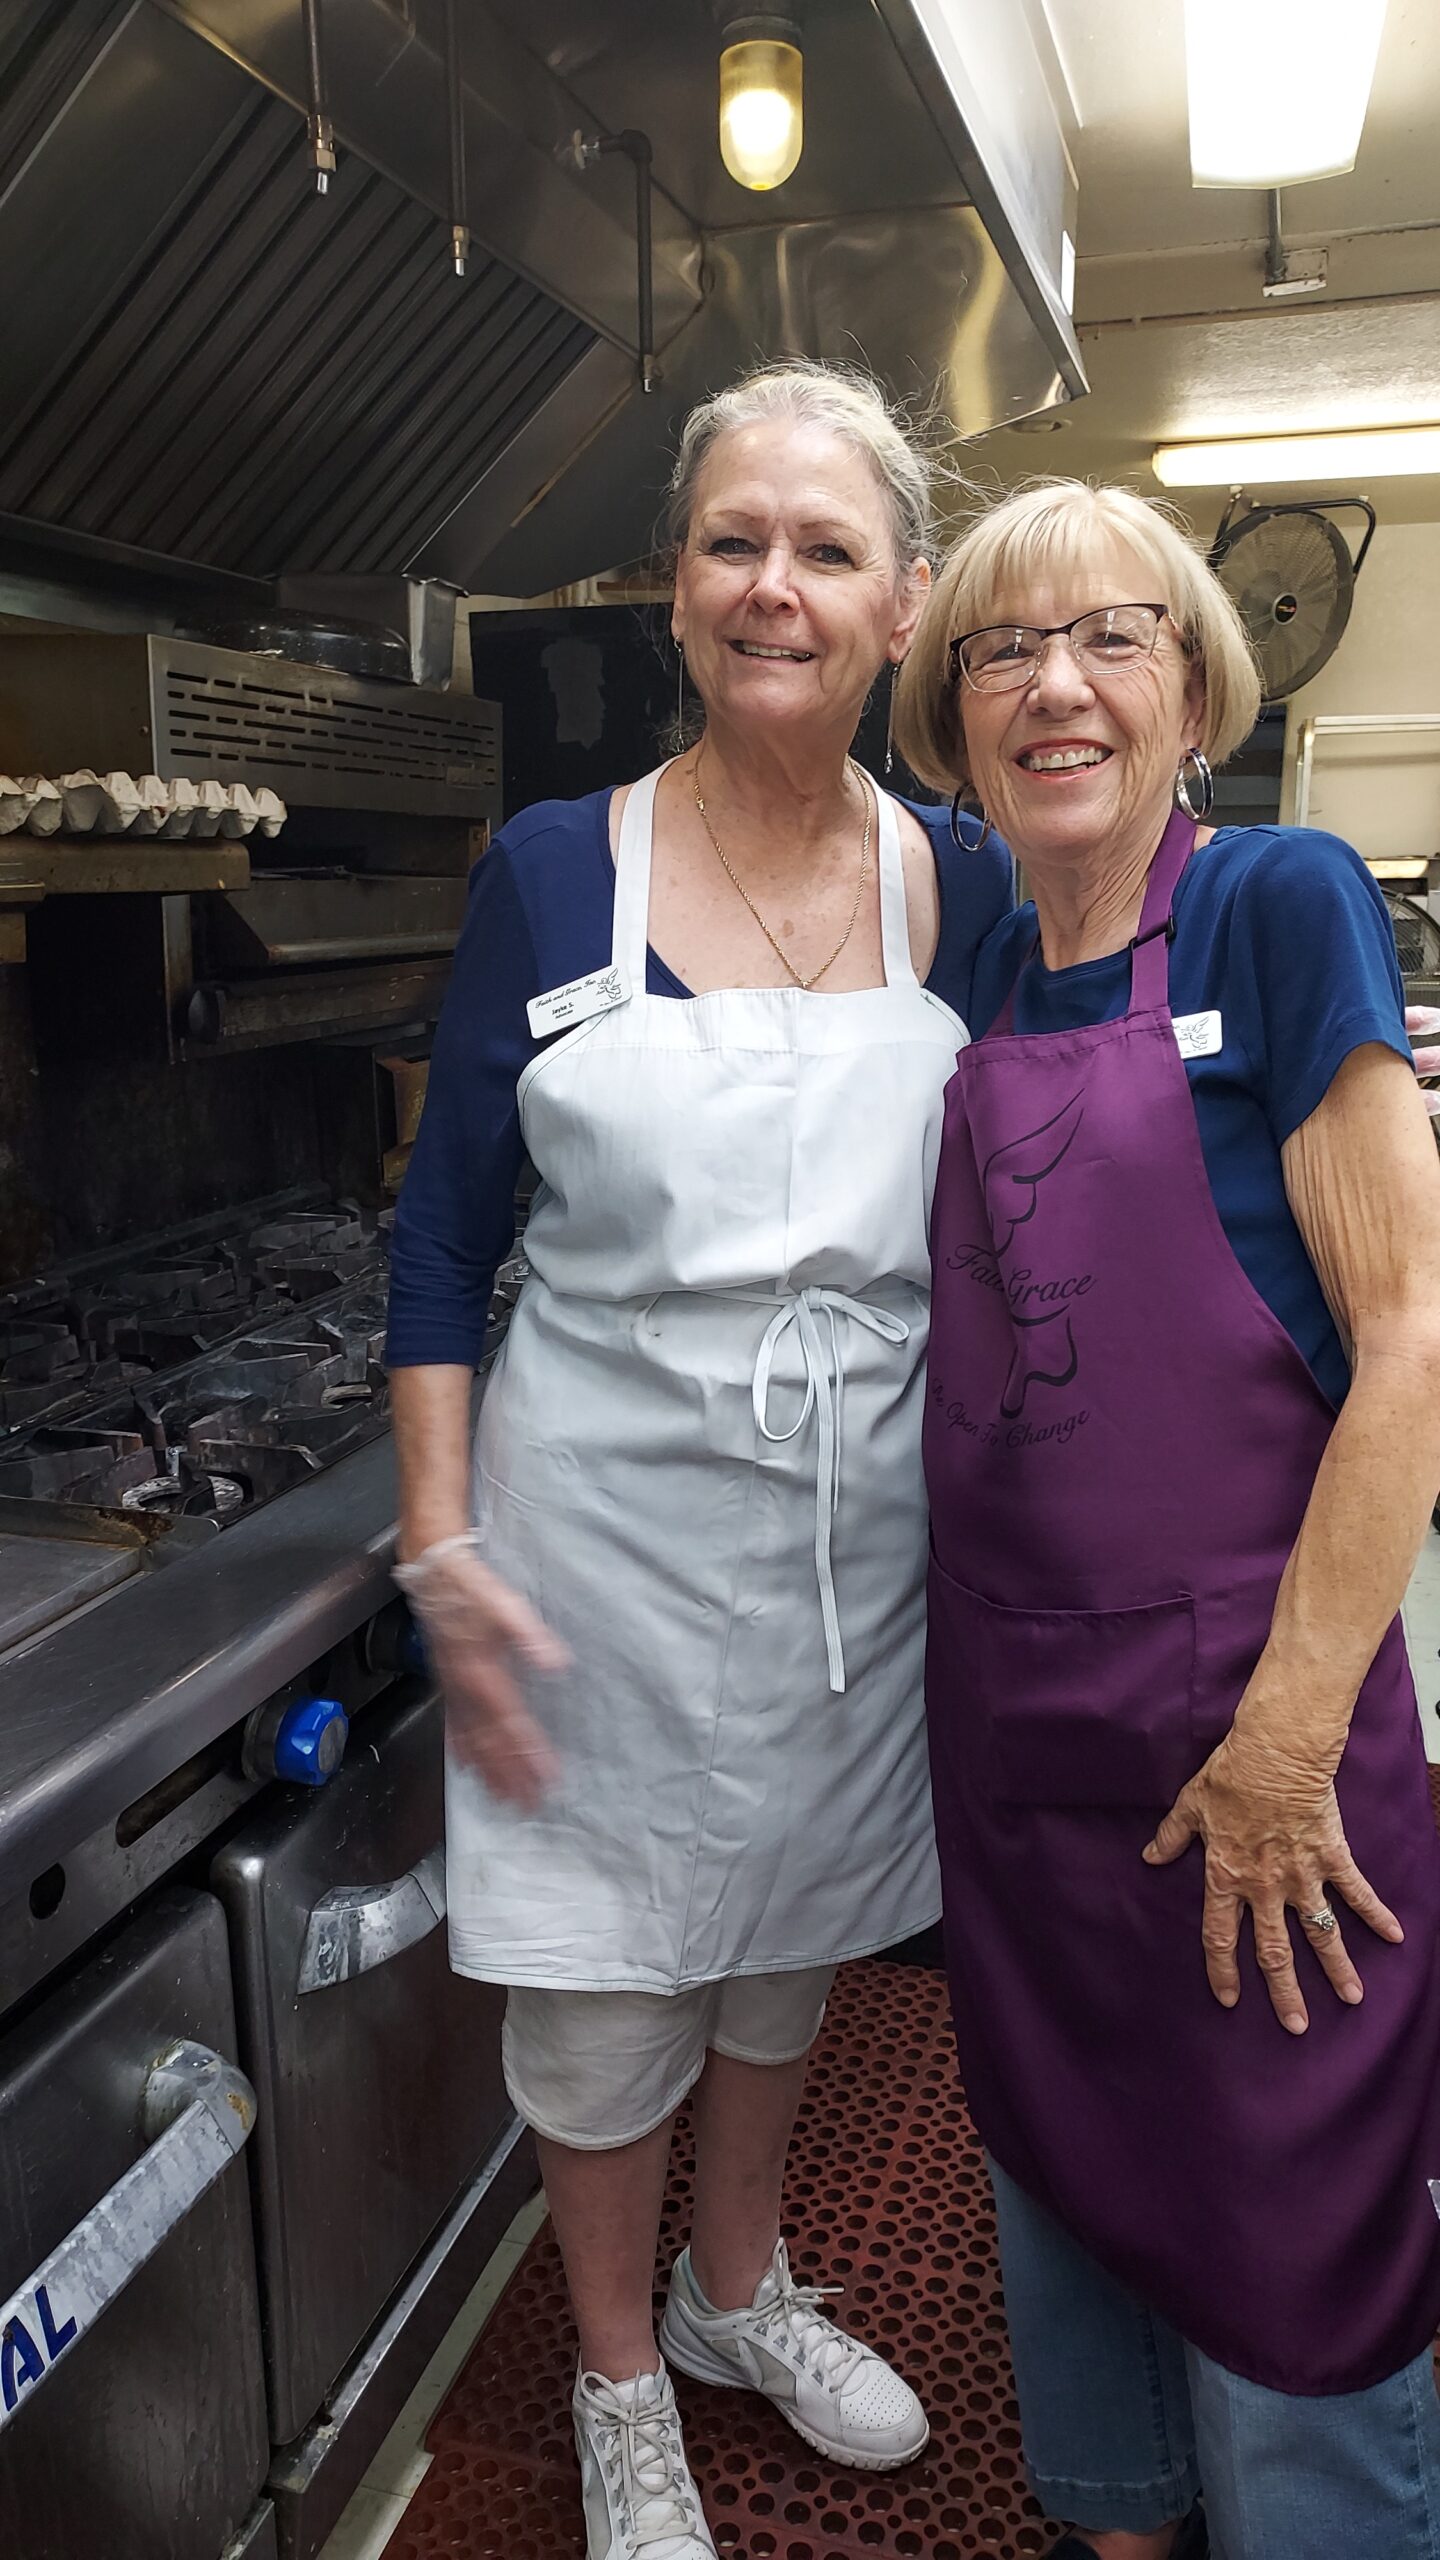 Advocate Jayke Schrengost and Jean McDougall cooking at the Eagles for the May fundraiser